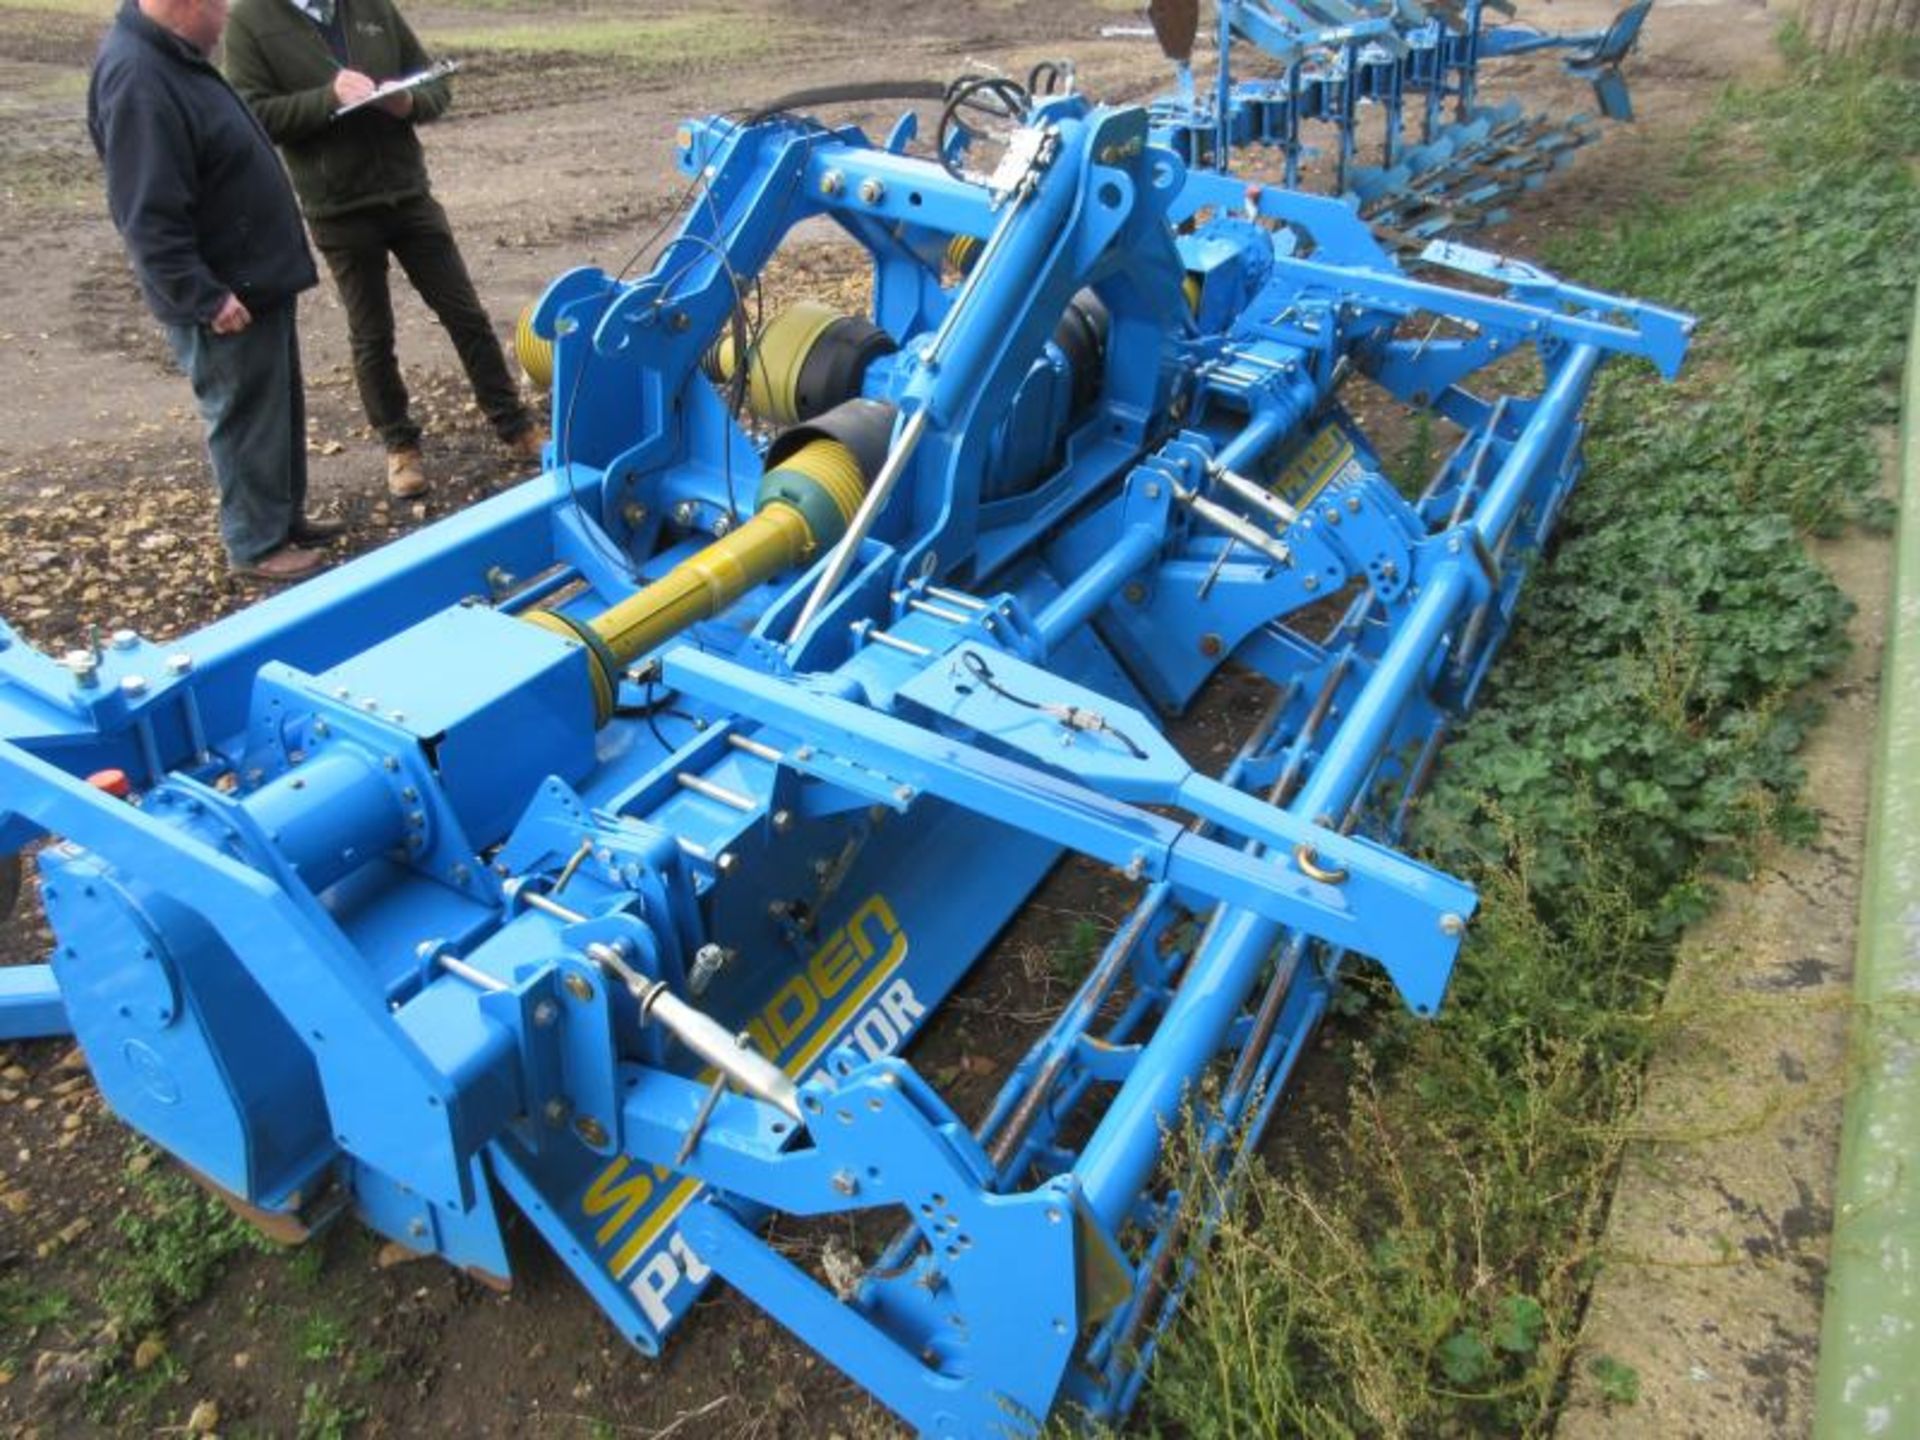 2016 Standen PV400-140 Powavator hydraulic folding rotary tiller with rear crumbler bar c/w stands - Image 4 of 6